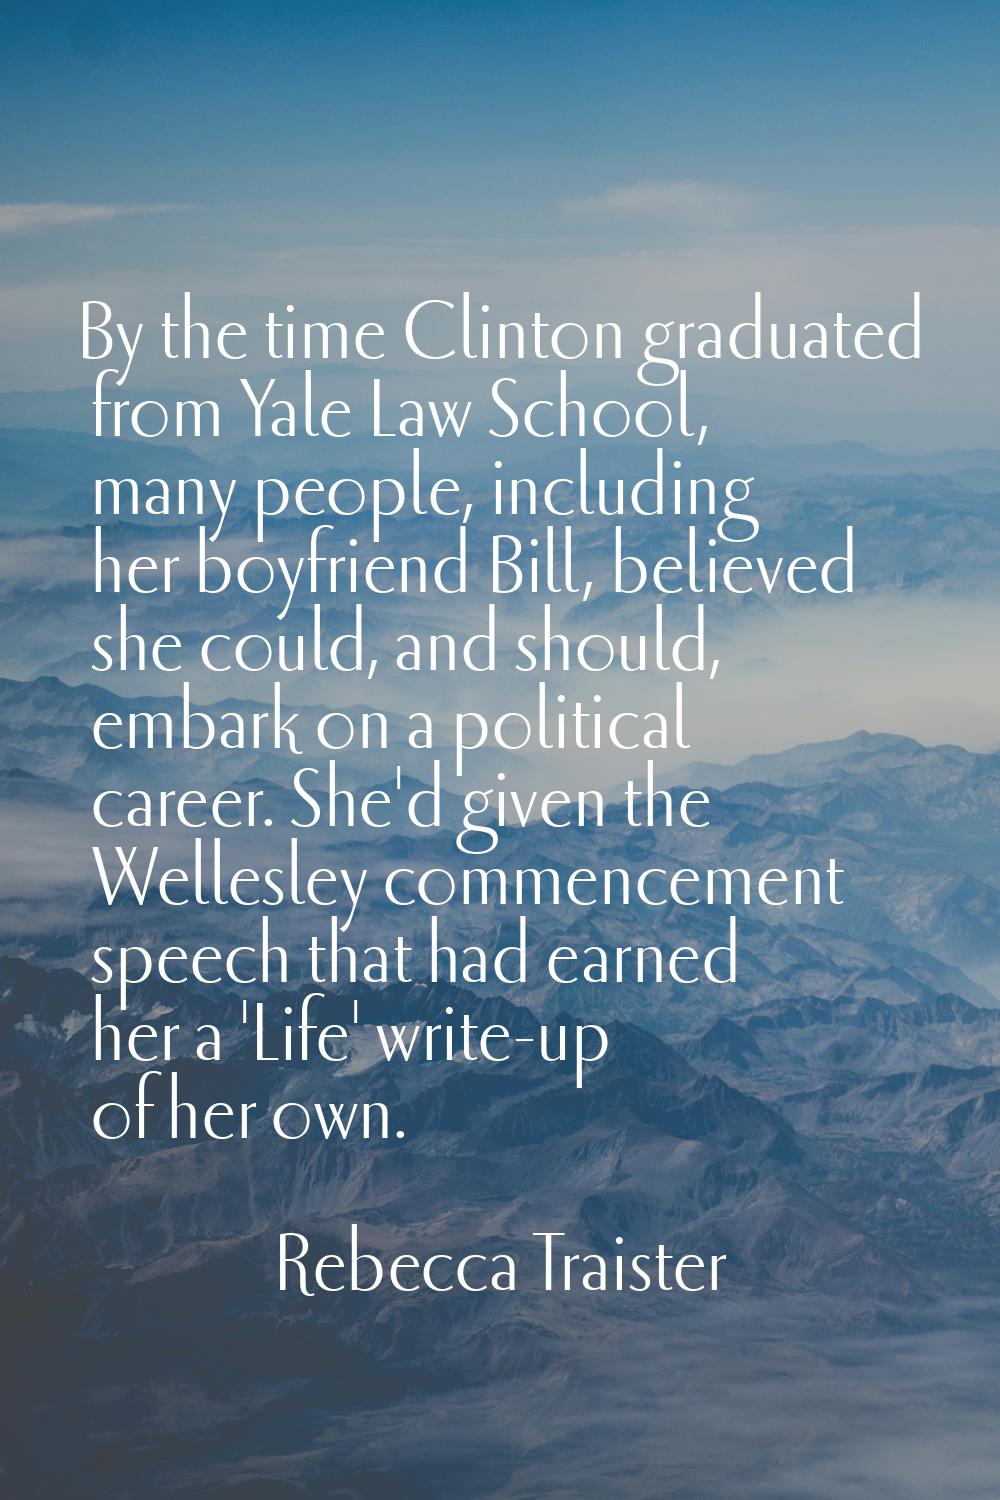 By the time Clinton graduated from Yale Law School, many people, including her boyfriend Bill, beli